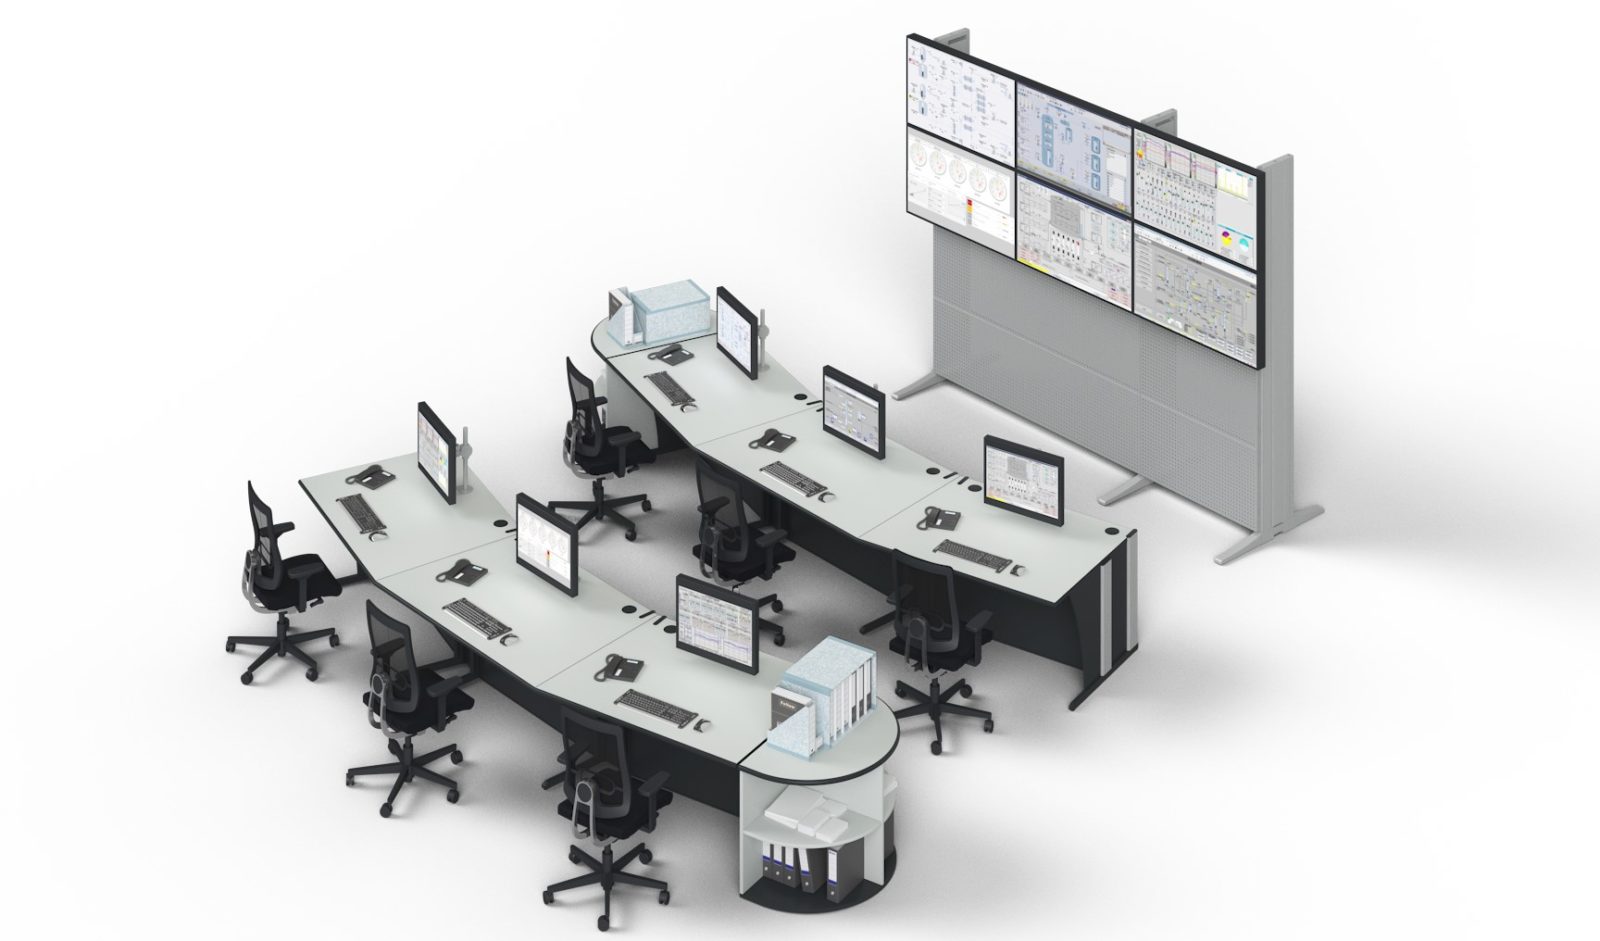 Graphic 3-D illustration of Dacobas workstation with video wall